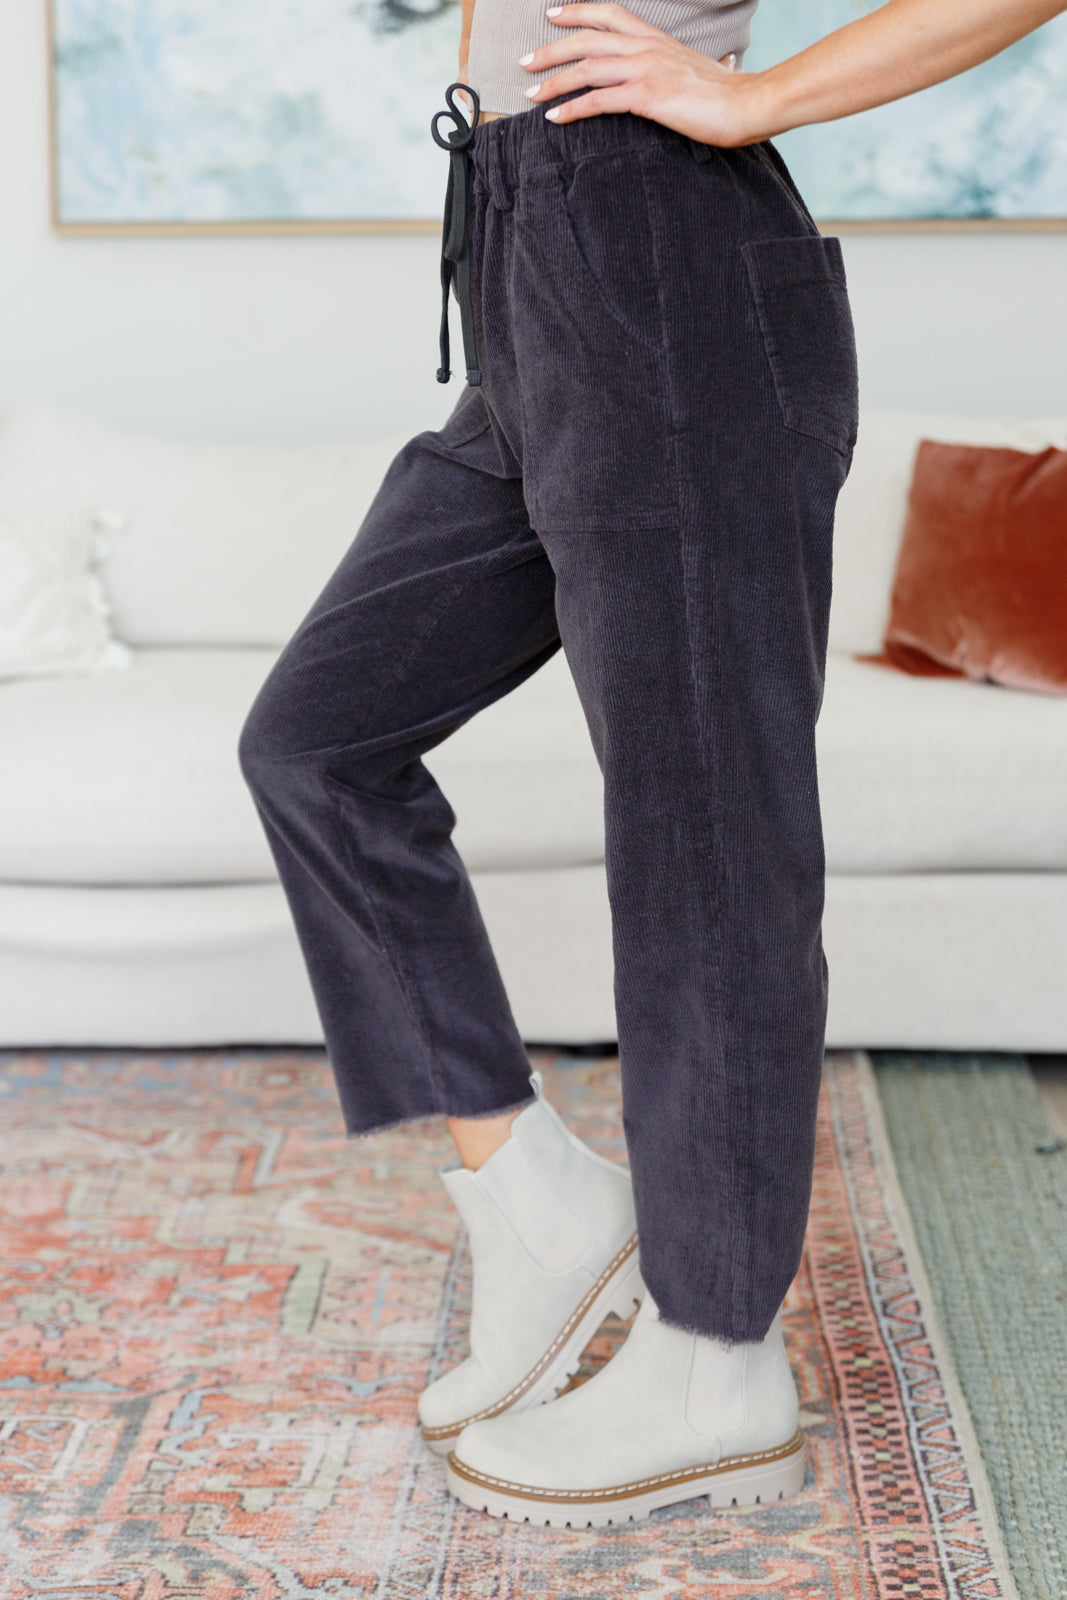 Less Confused Corduroy Pants Womens Ave Shops   